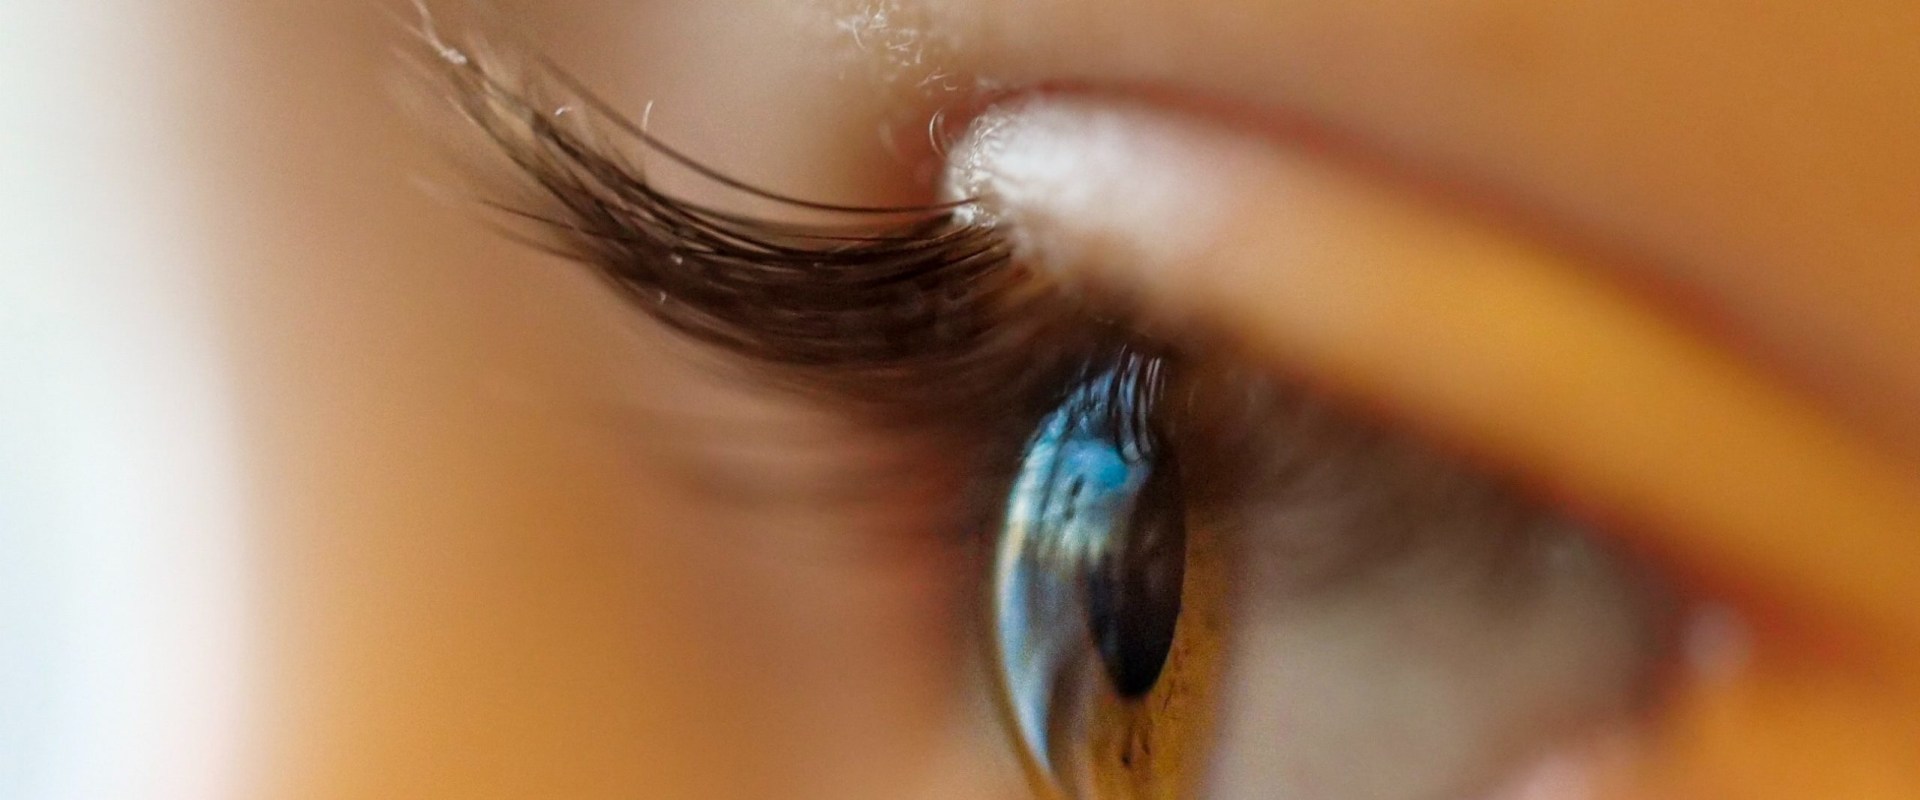 How to Ensure Your Contact Lens Prescription is Accurate